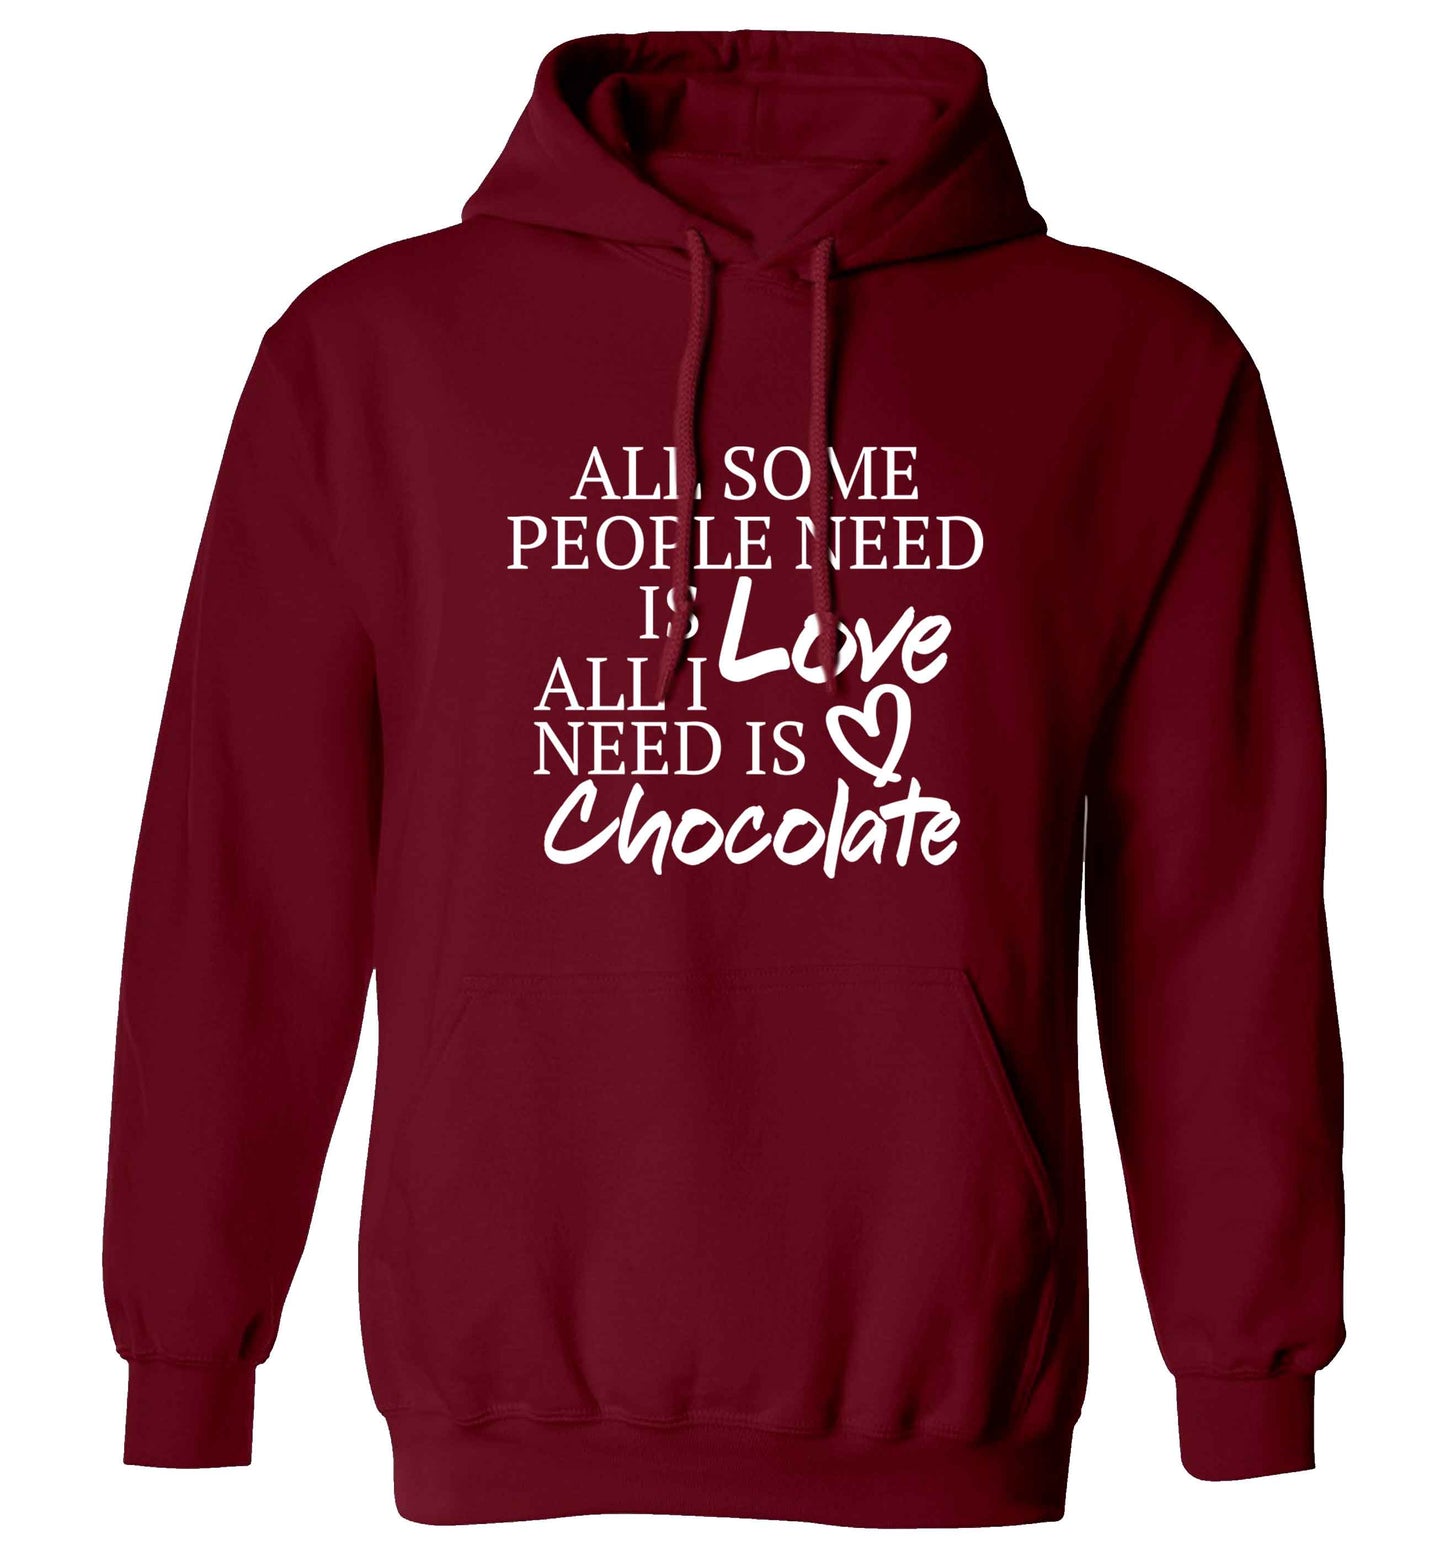 All some people need is love all I need is chocolate adults unisex maroon hoodie 2XL